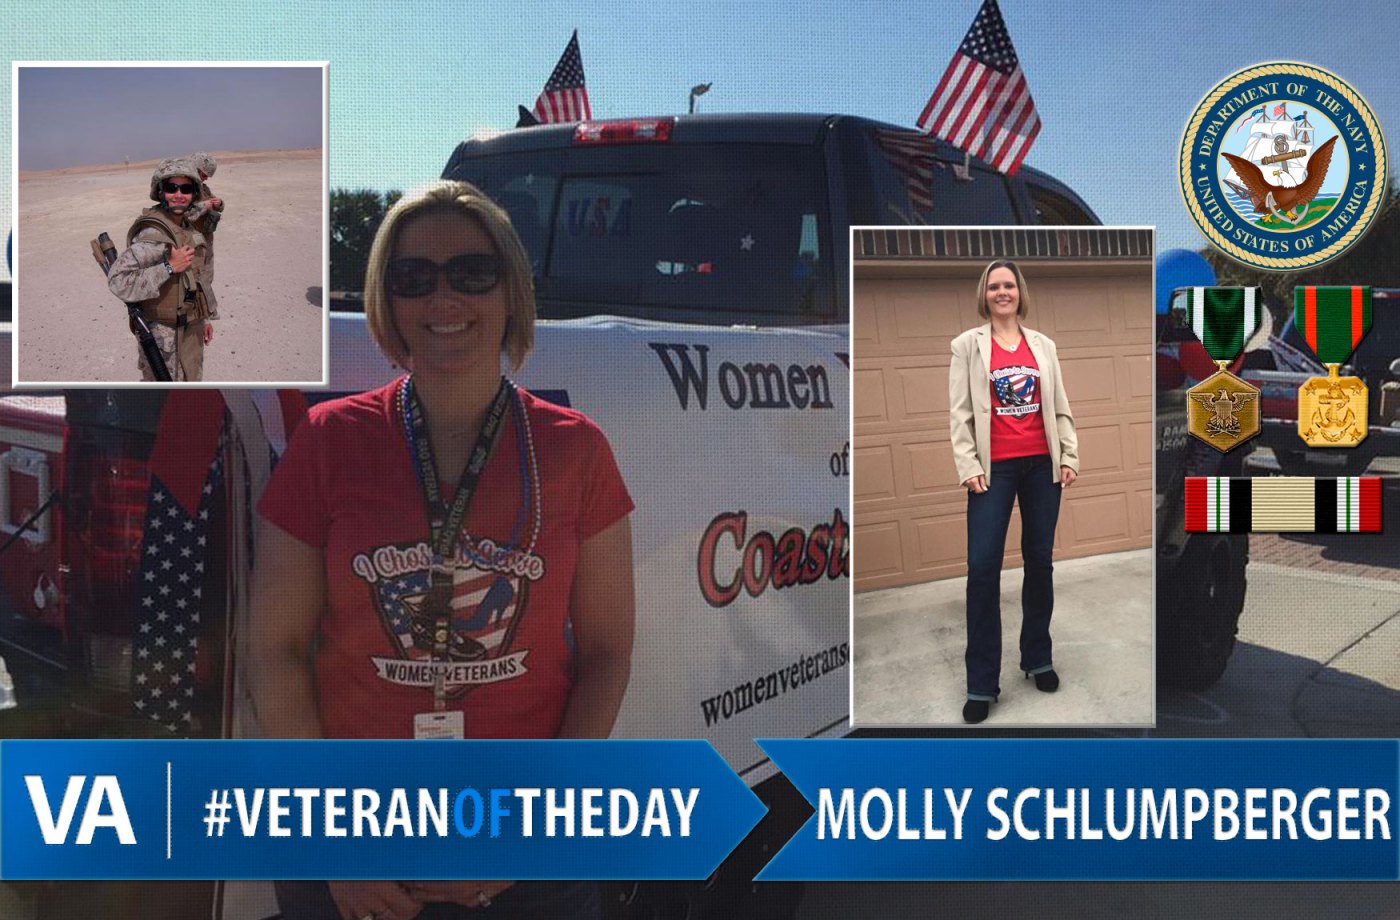 Veteran of the day Molly Schlumpberger